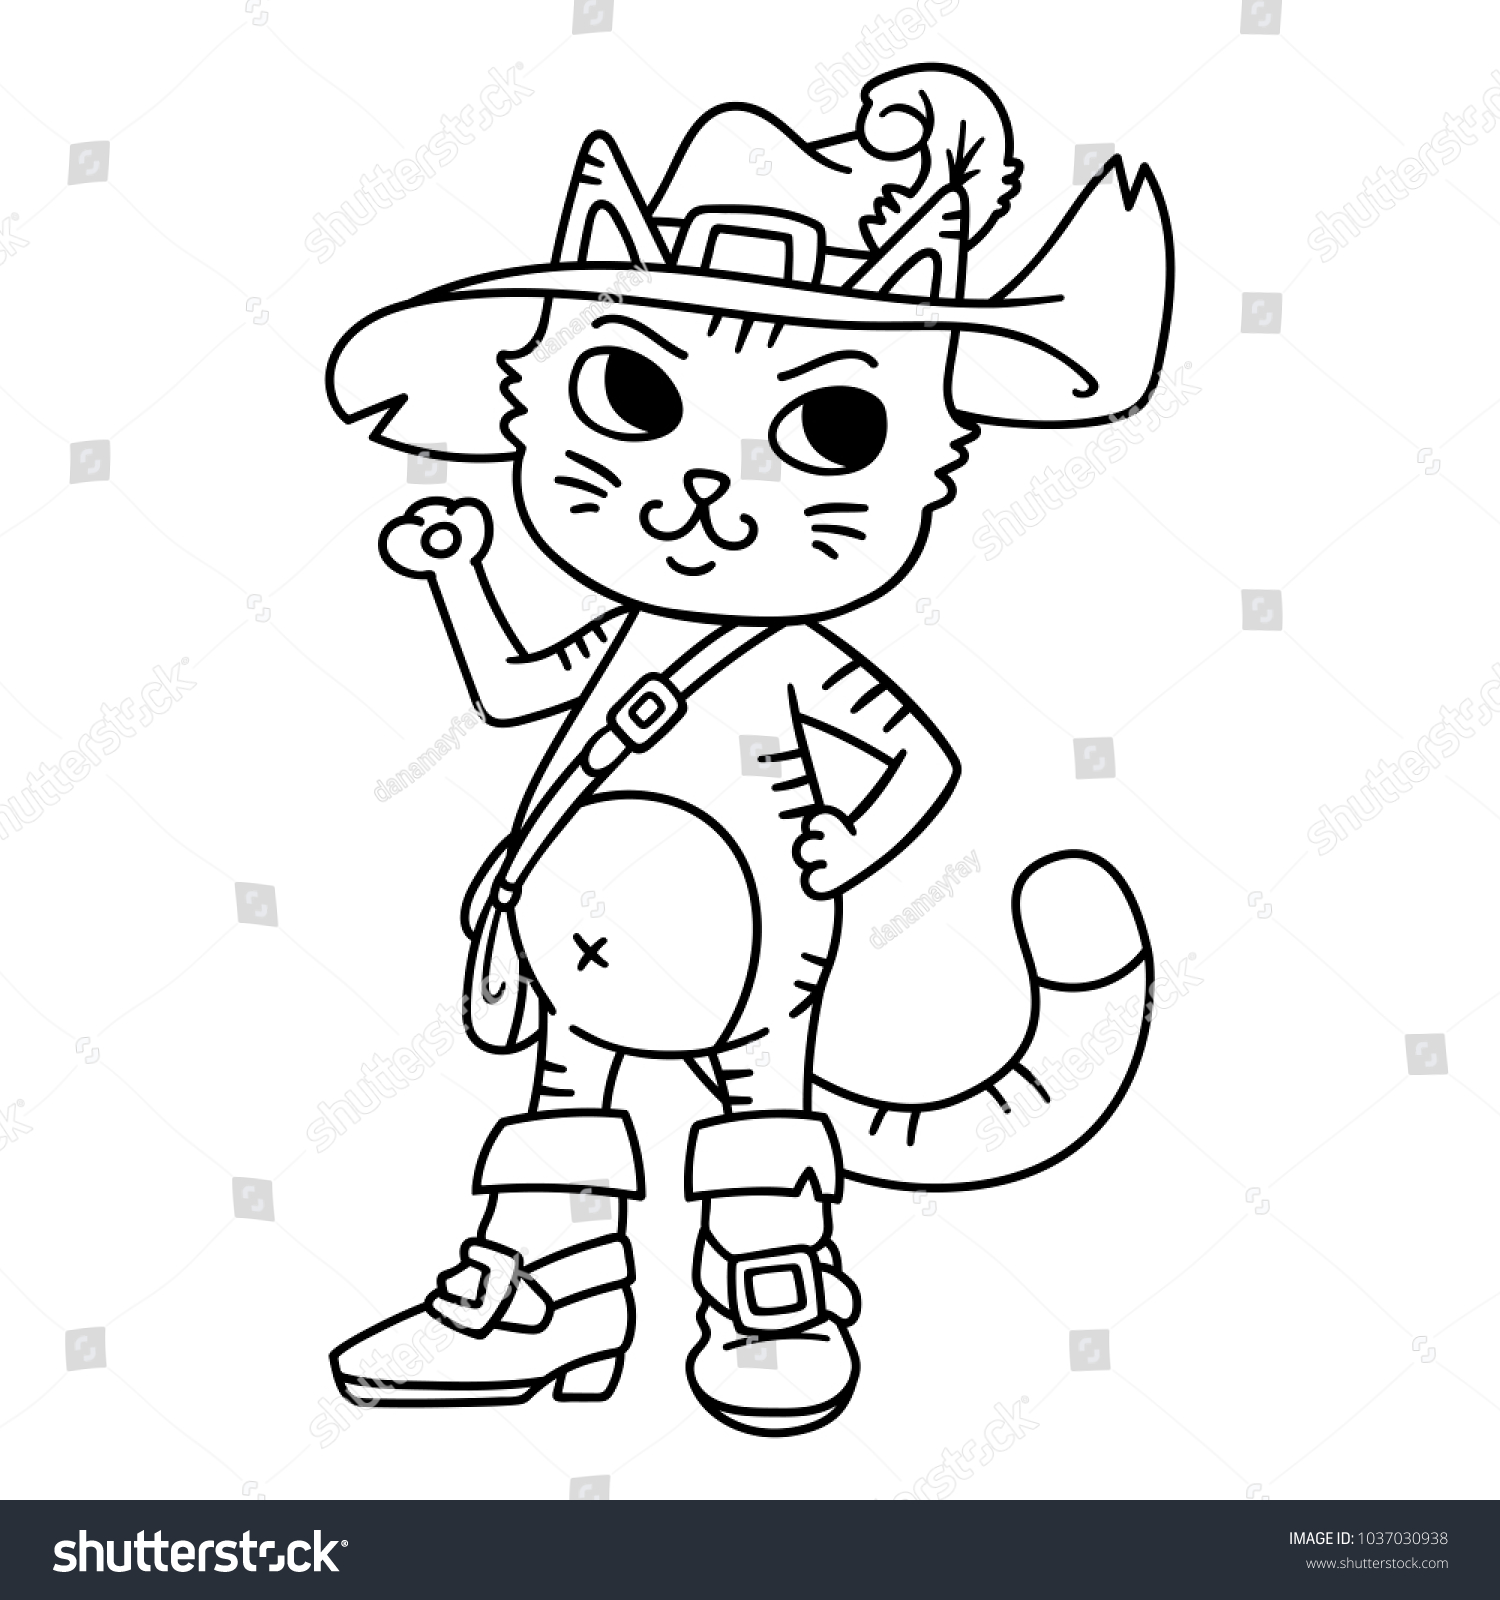 SVG of Puss in boots. Children illustration. Page for coloring book. svg